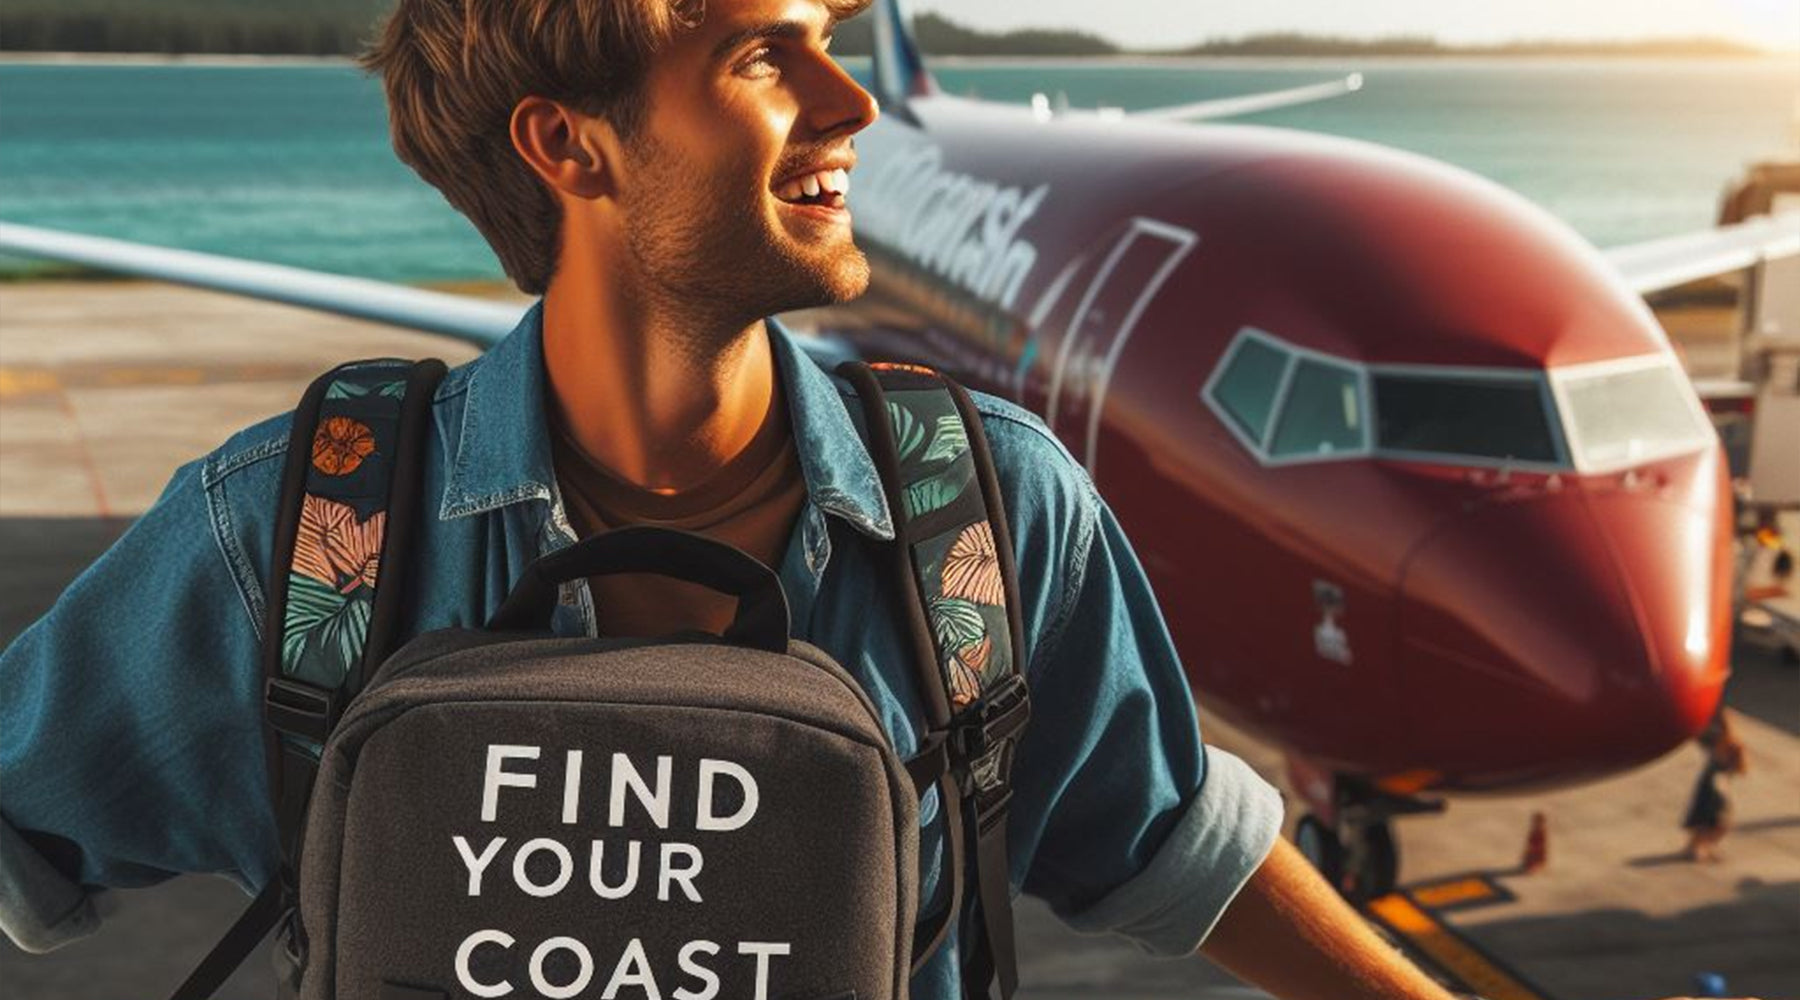 Find Your Coast backpacks - Pack for Adventure